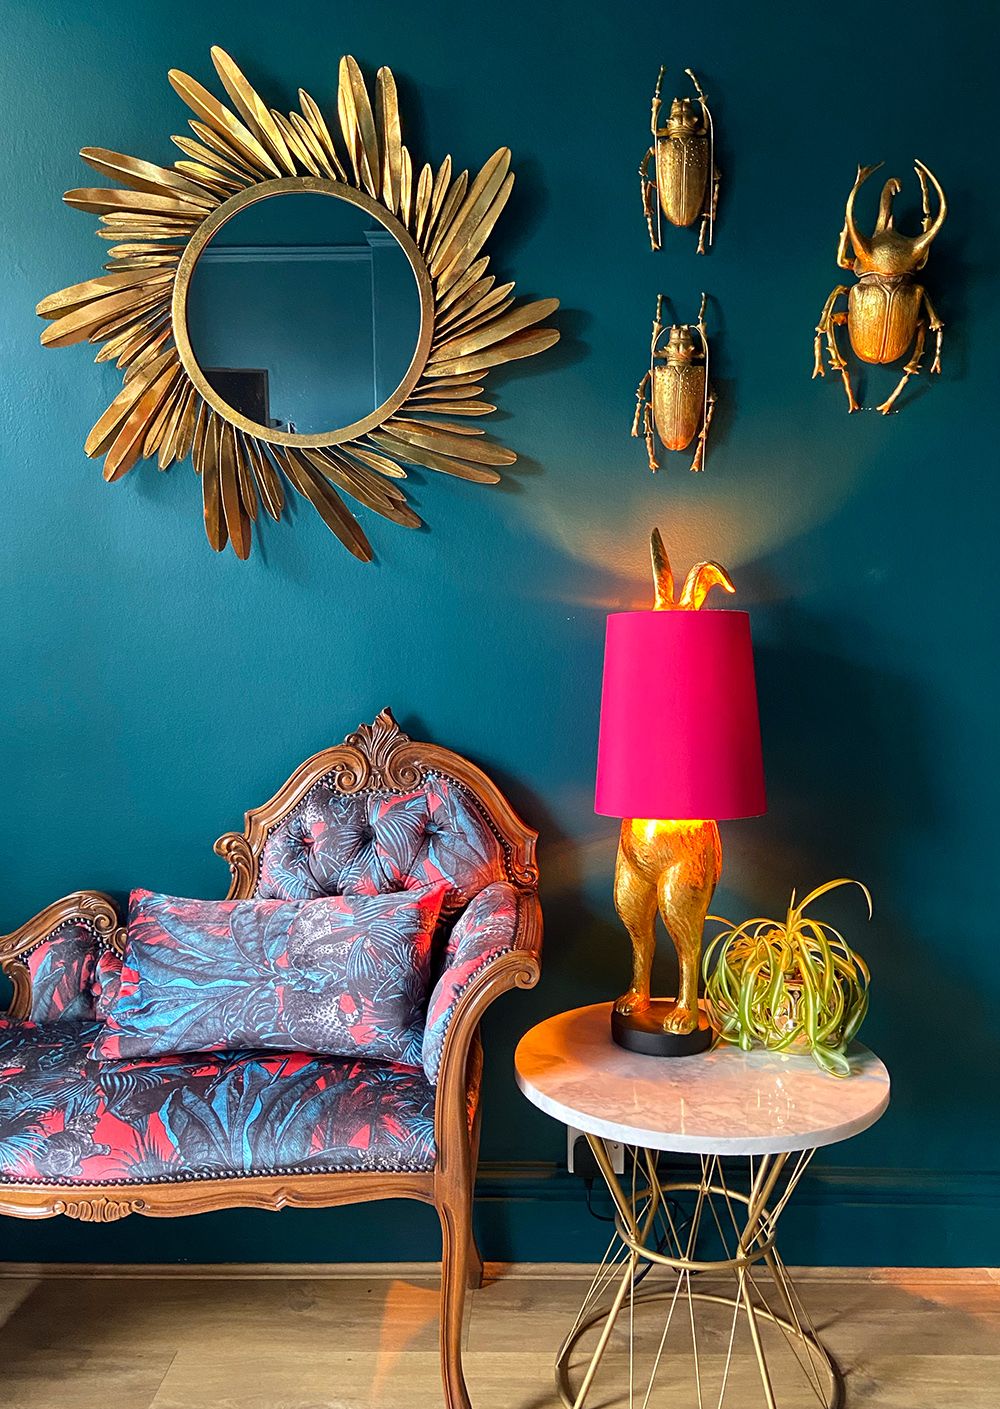 Quirky living room with dark blue walls, hot pink animal lamp and quirky wall decor like these fabulous gold beetles. All available from Audenza